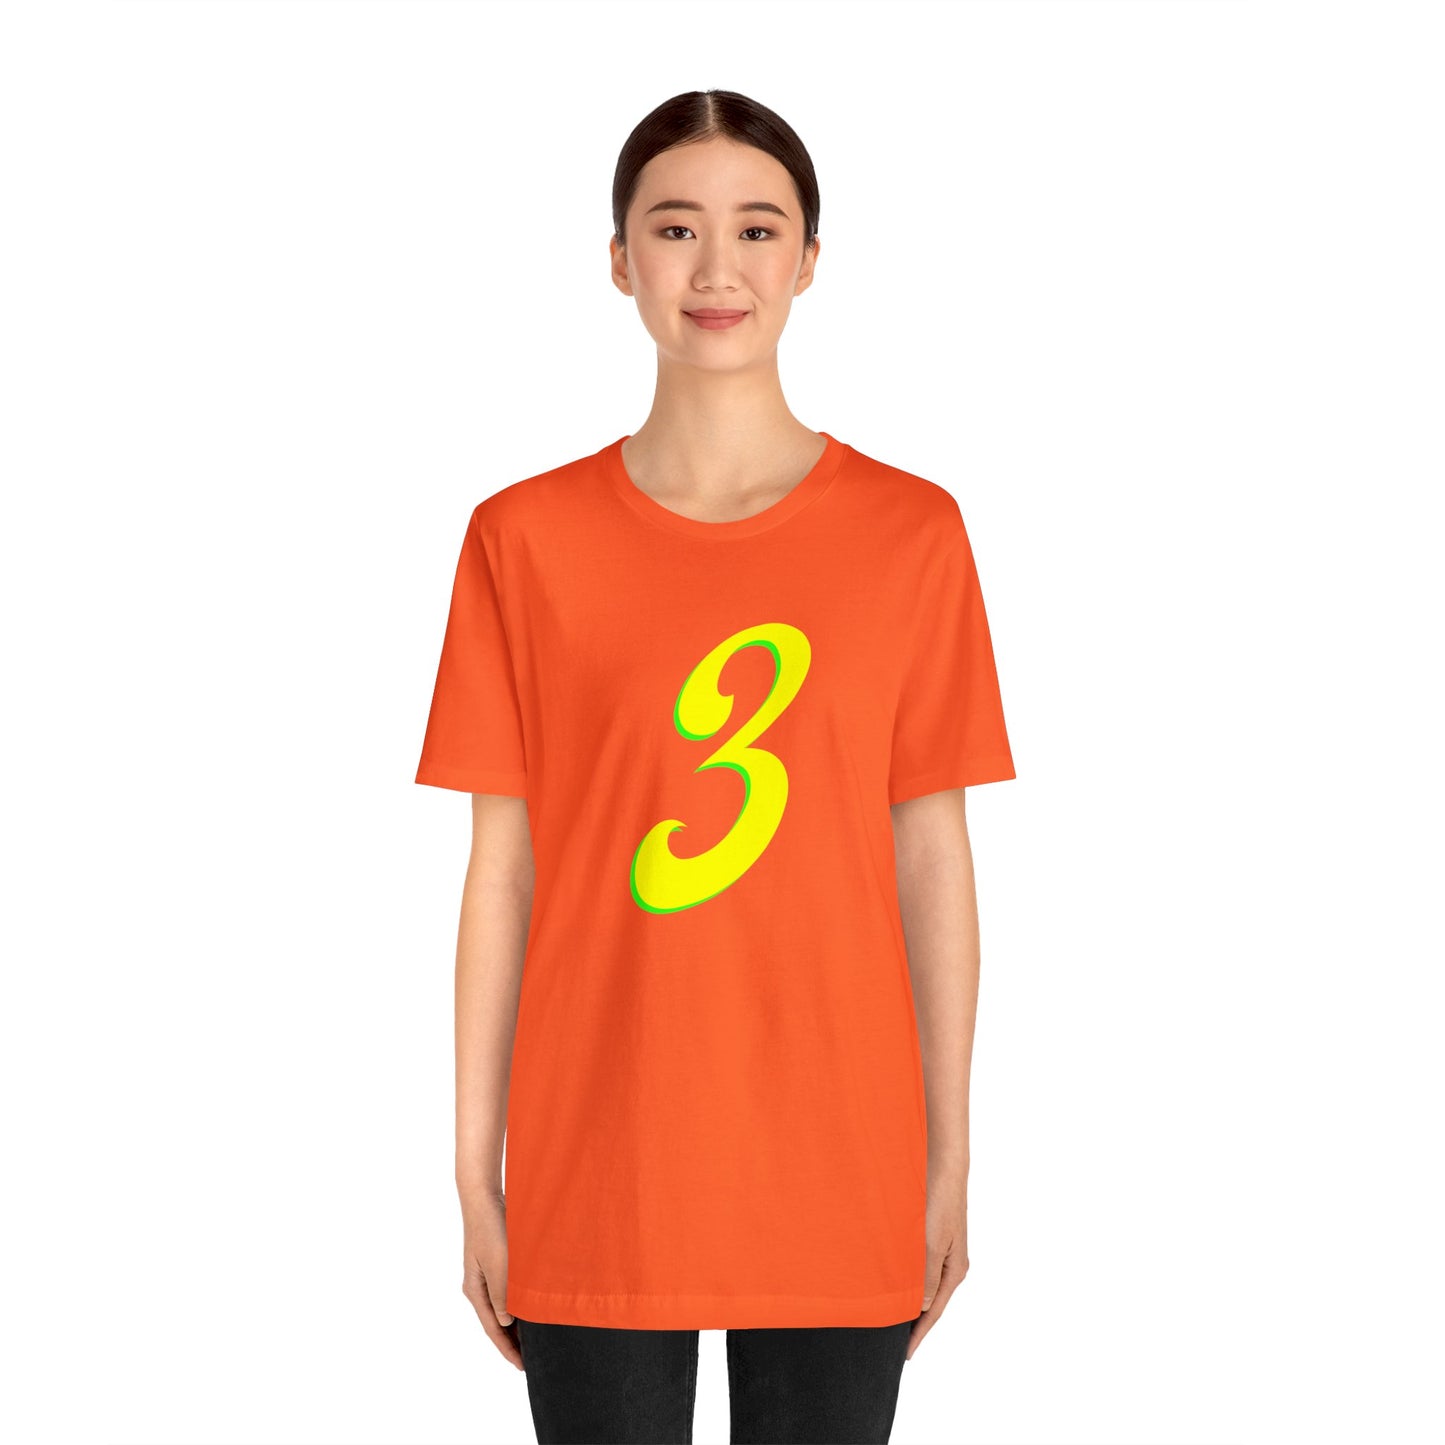 Number 3 Design - Soft Cotton Tee for birthdays and celebrations, Gift for friends and family, Multiple Options by clothezy.com in Asphalt Size Medium - Buy Now